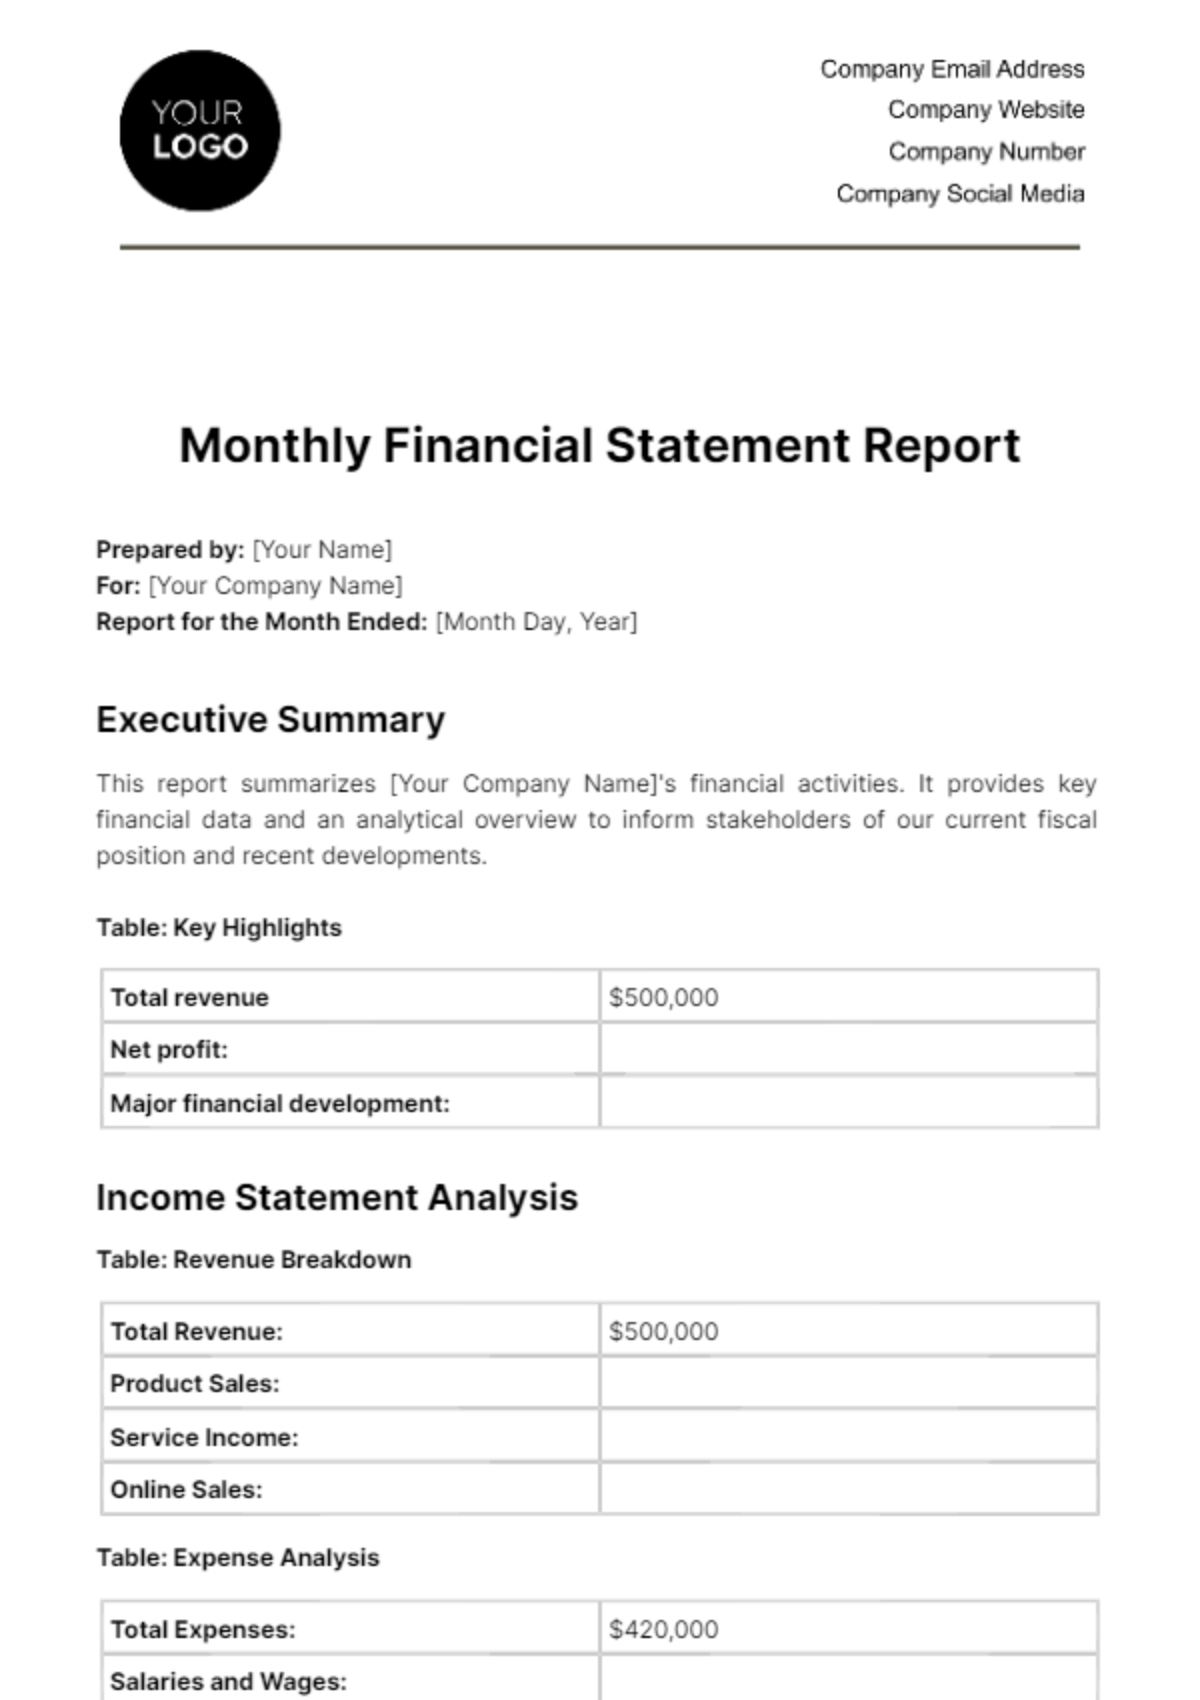 Monthly Financial Statement Report Template